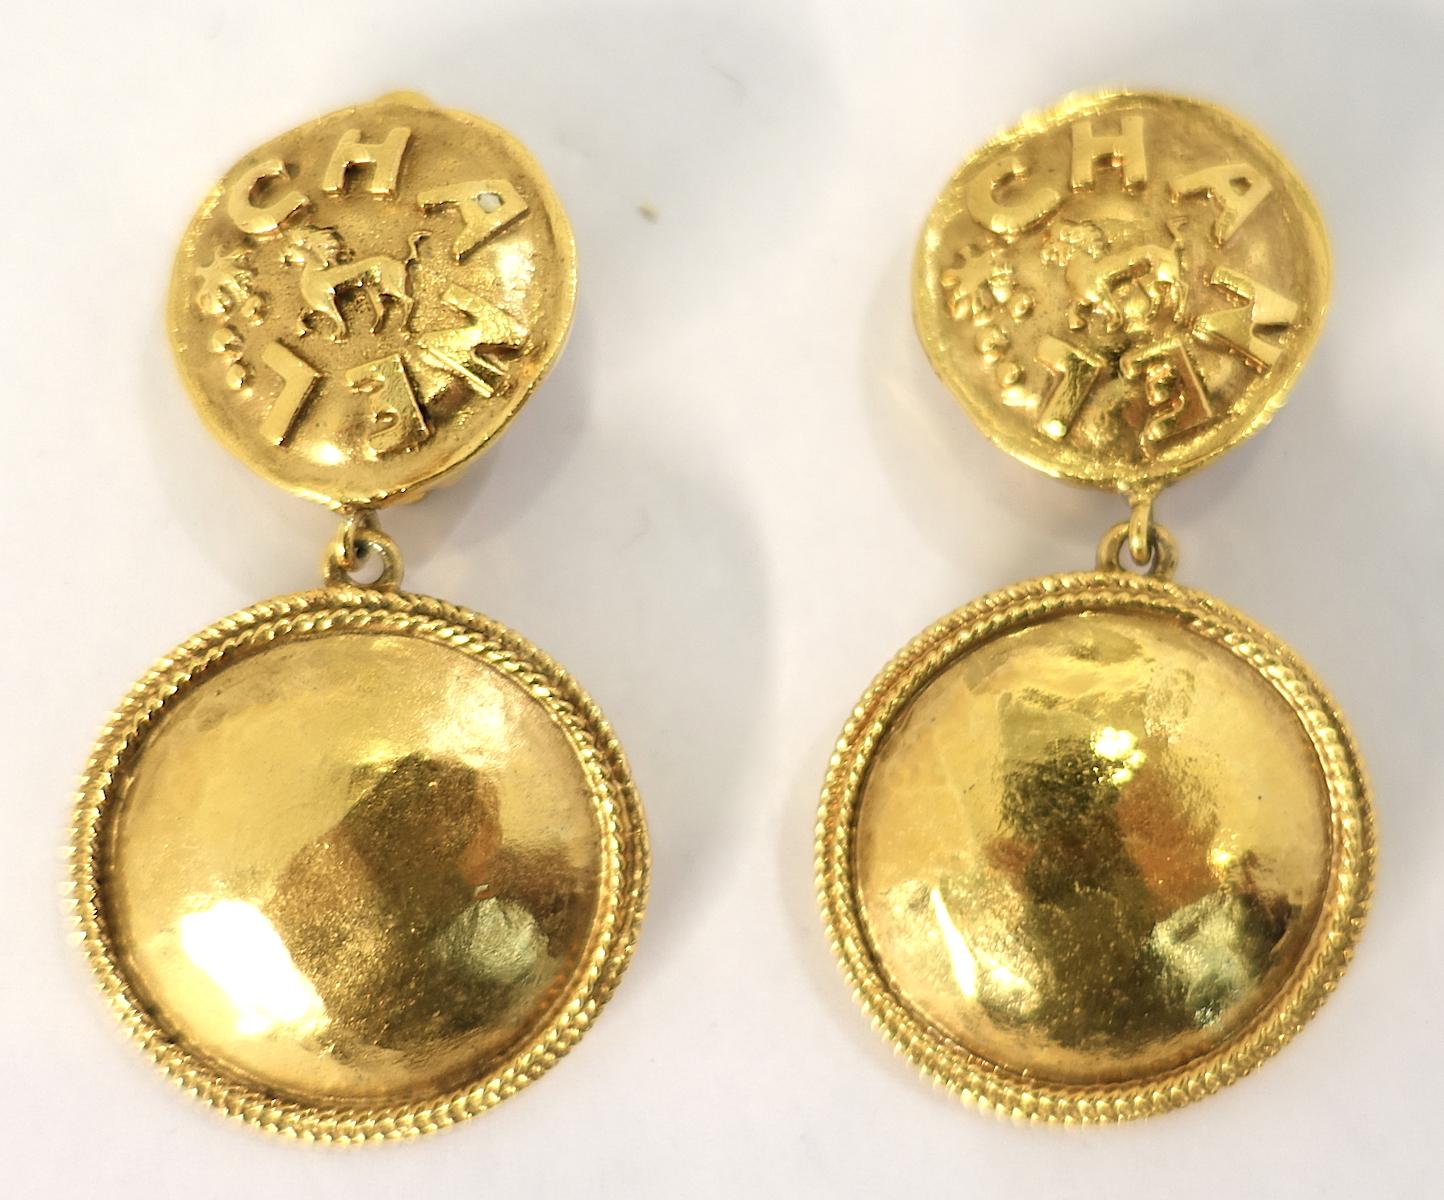 These vintage signed Chanel earrings have a circle top with “Chanel” written in a gold tone metal setting.  Hanging down is a larger circle with ribbing on the outside.  These clip earrings measure 2” x 1-1/8” and are signed “Chanel 23 Made in